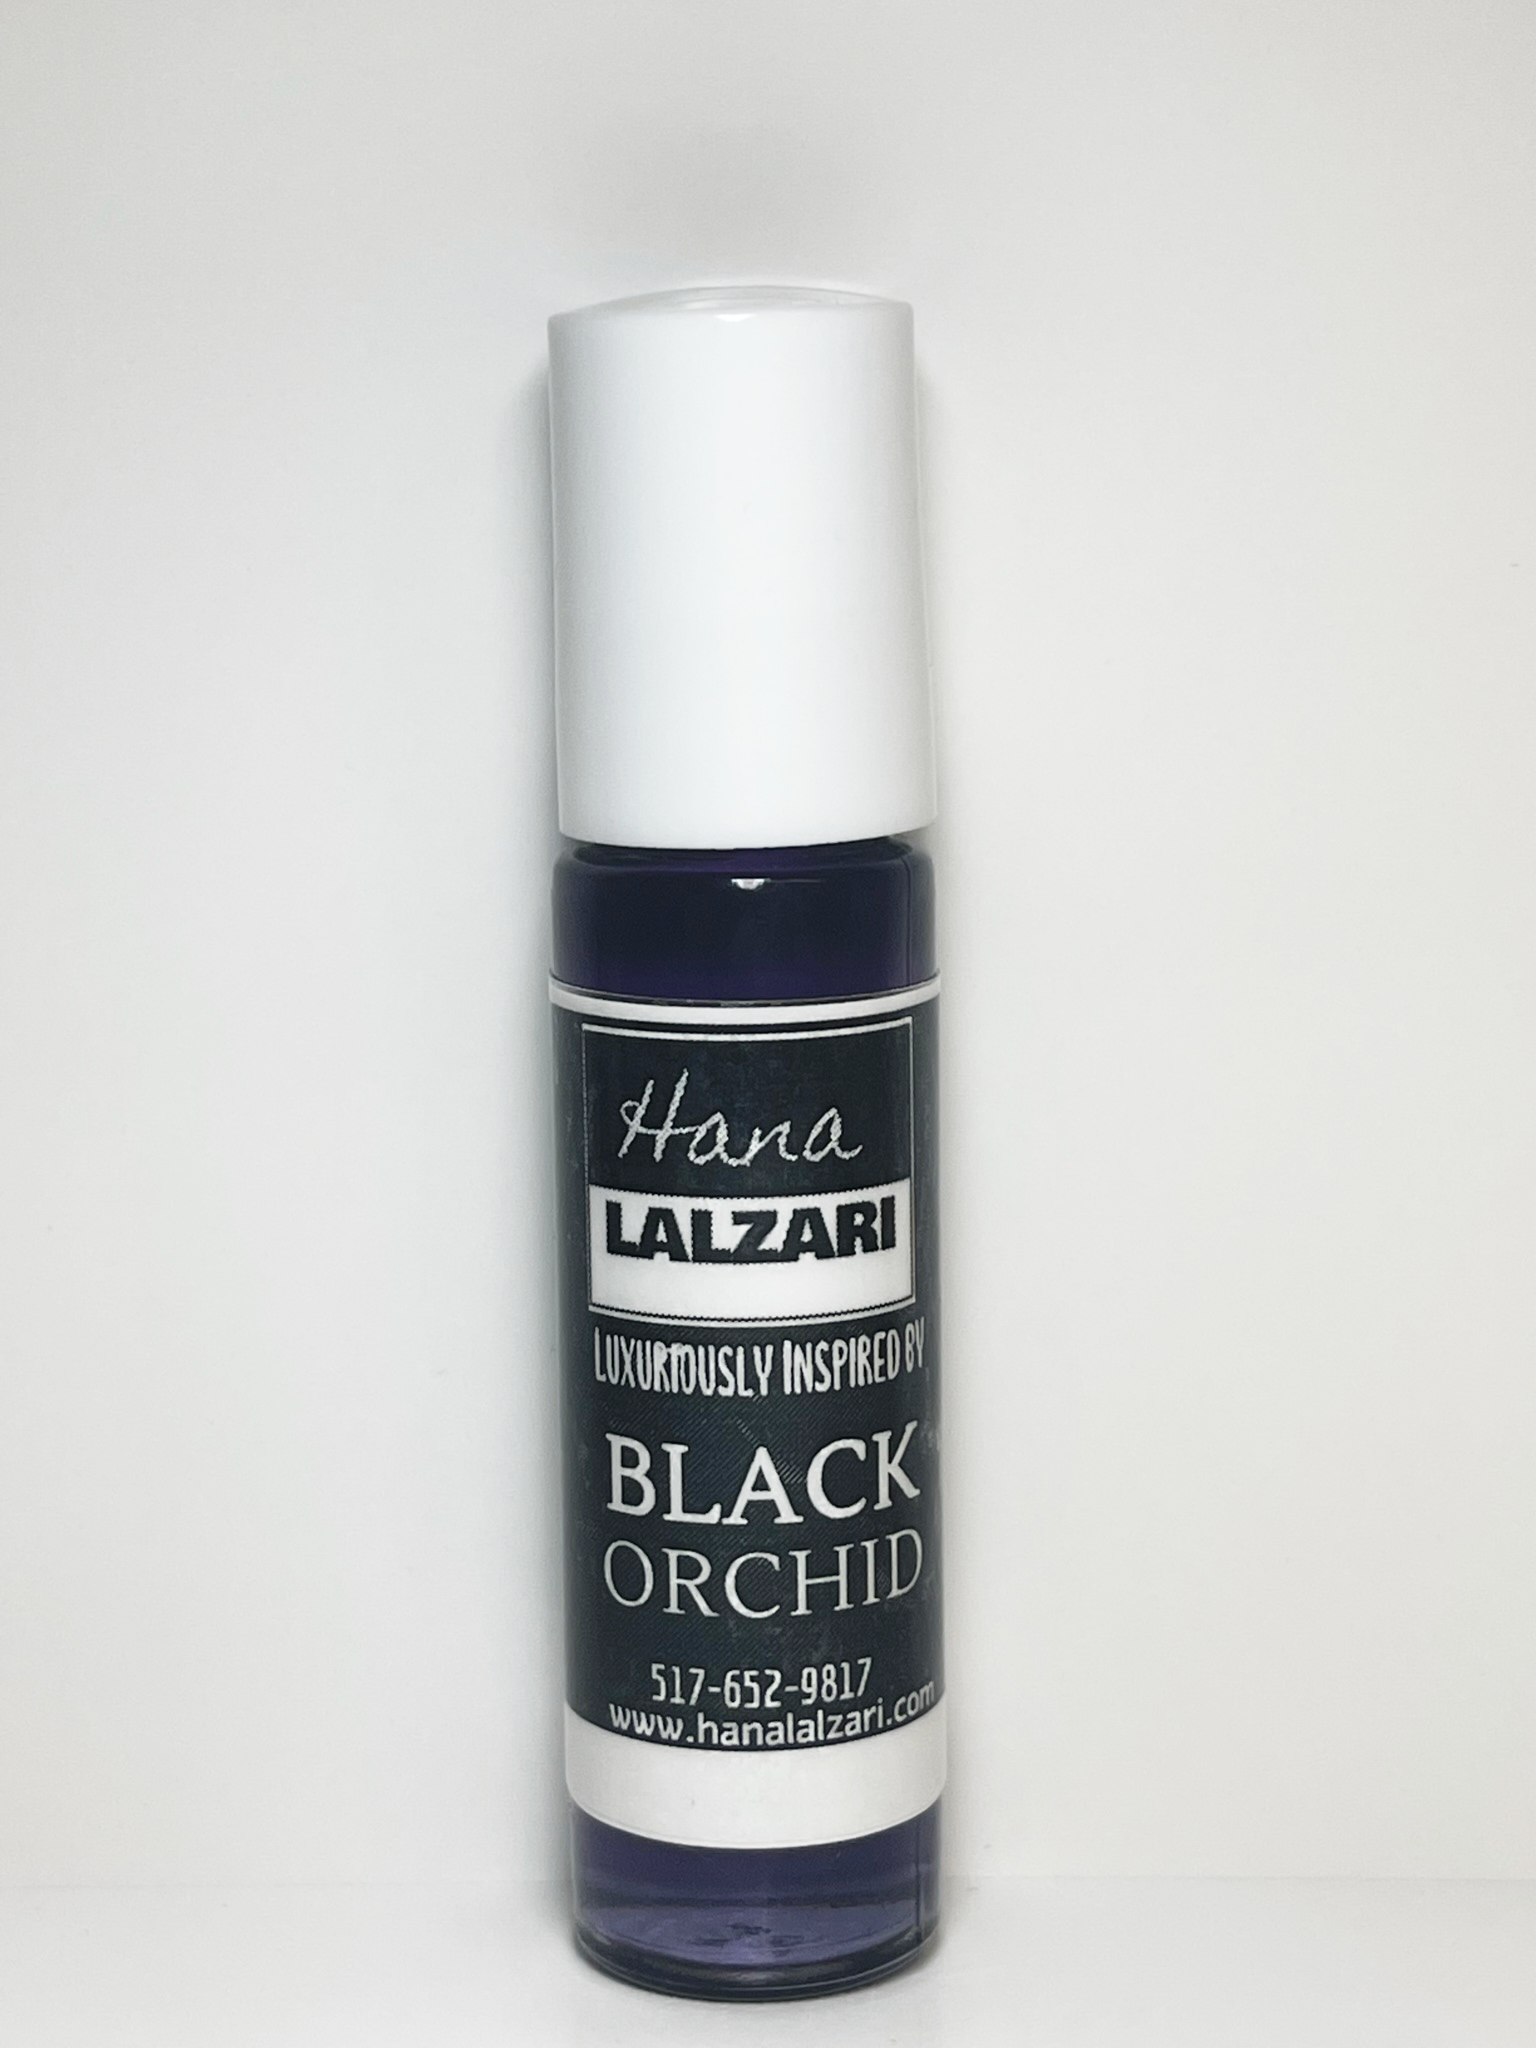 Luxuriously Inspired by Black Orchid